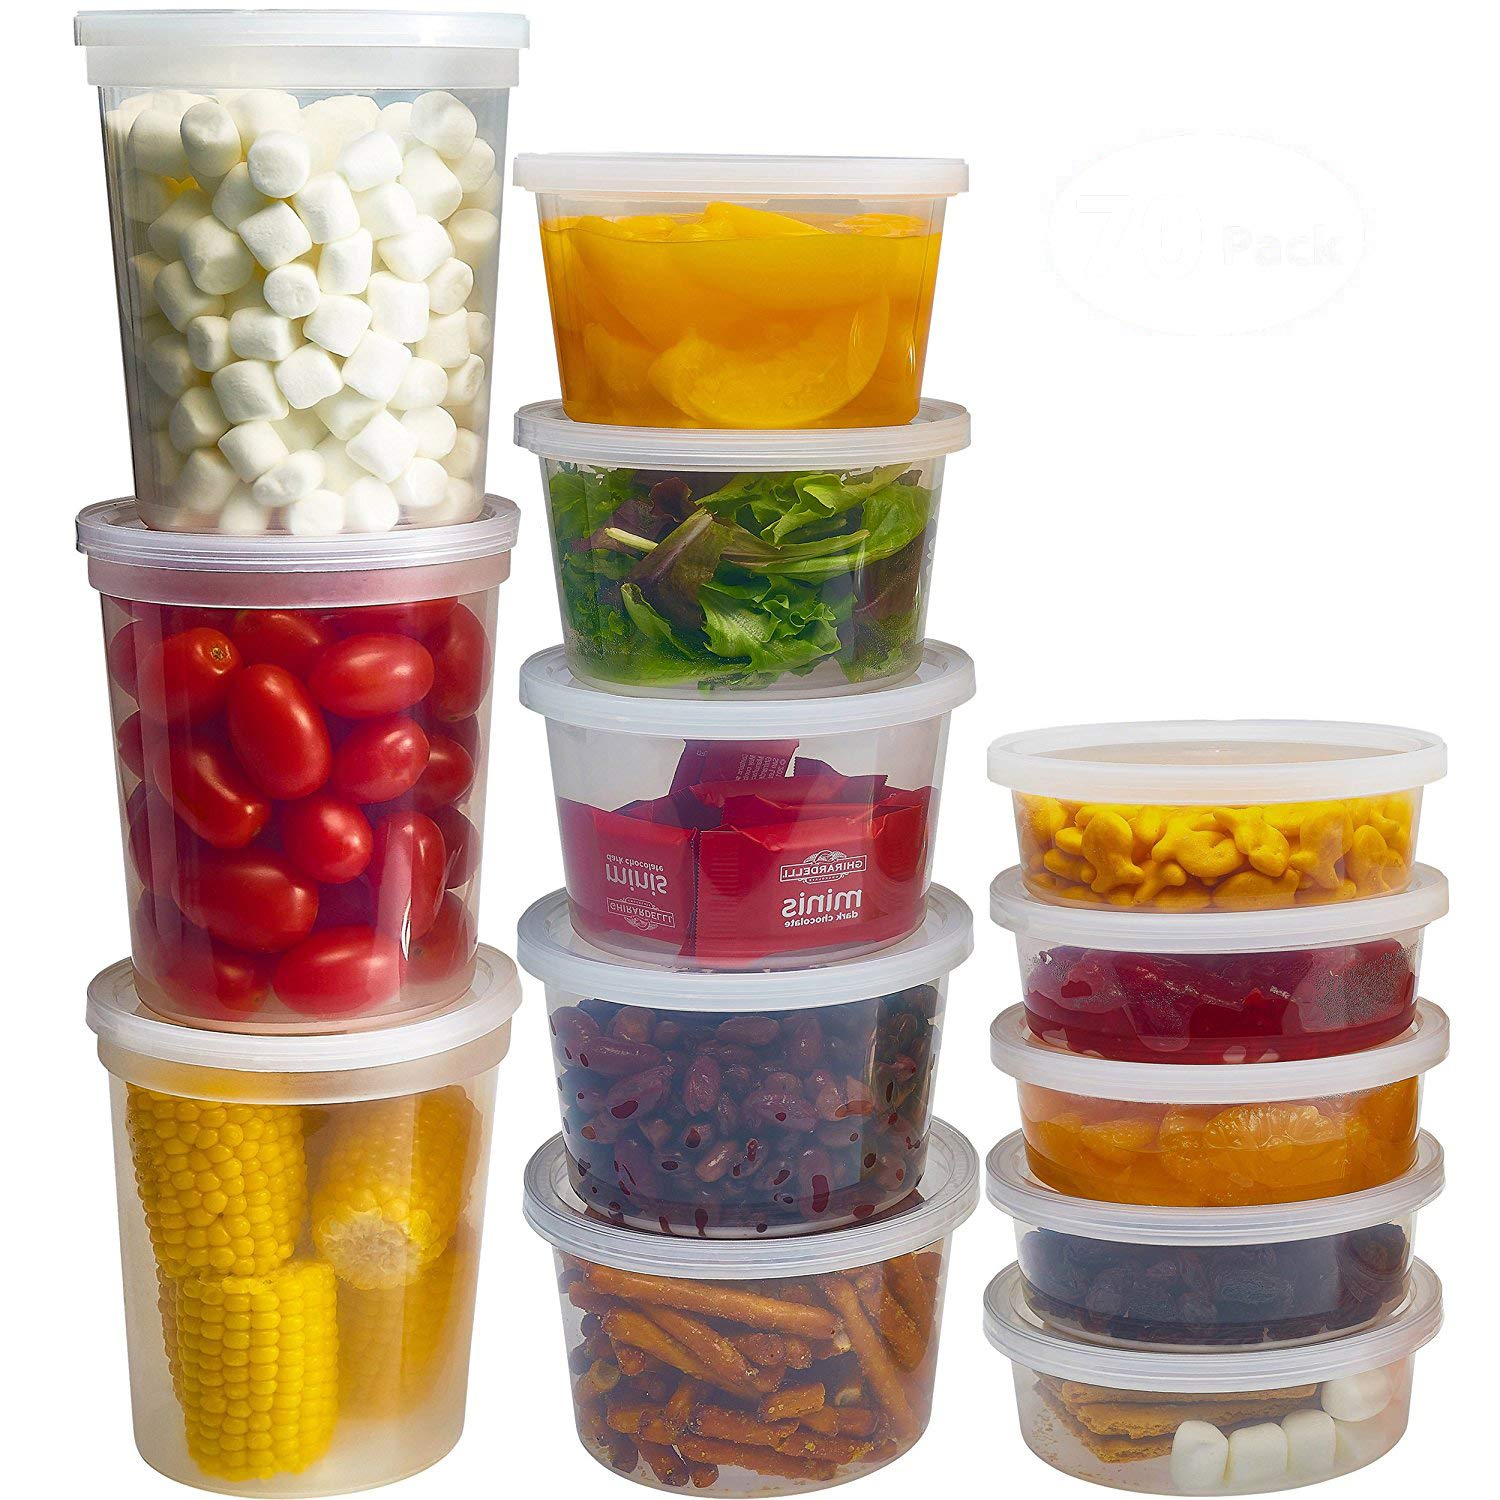 24 Pack Airtight Food Storage Container Set - BPA Free Clear